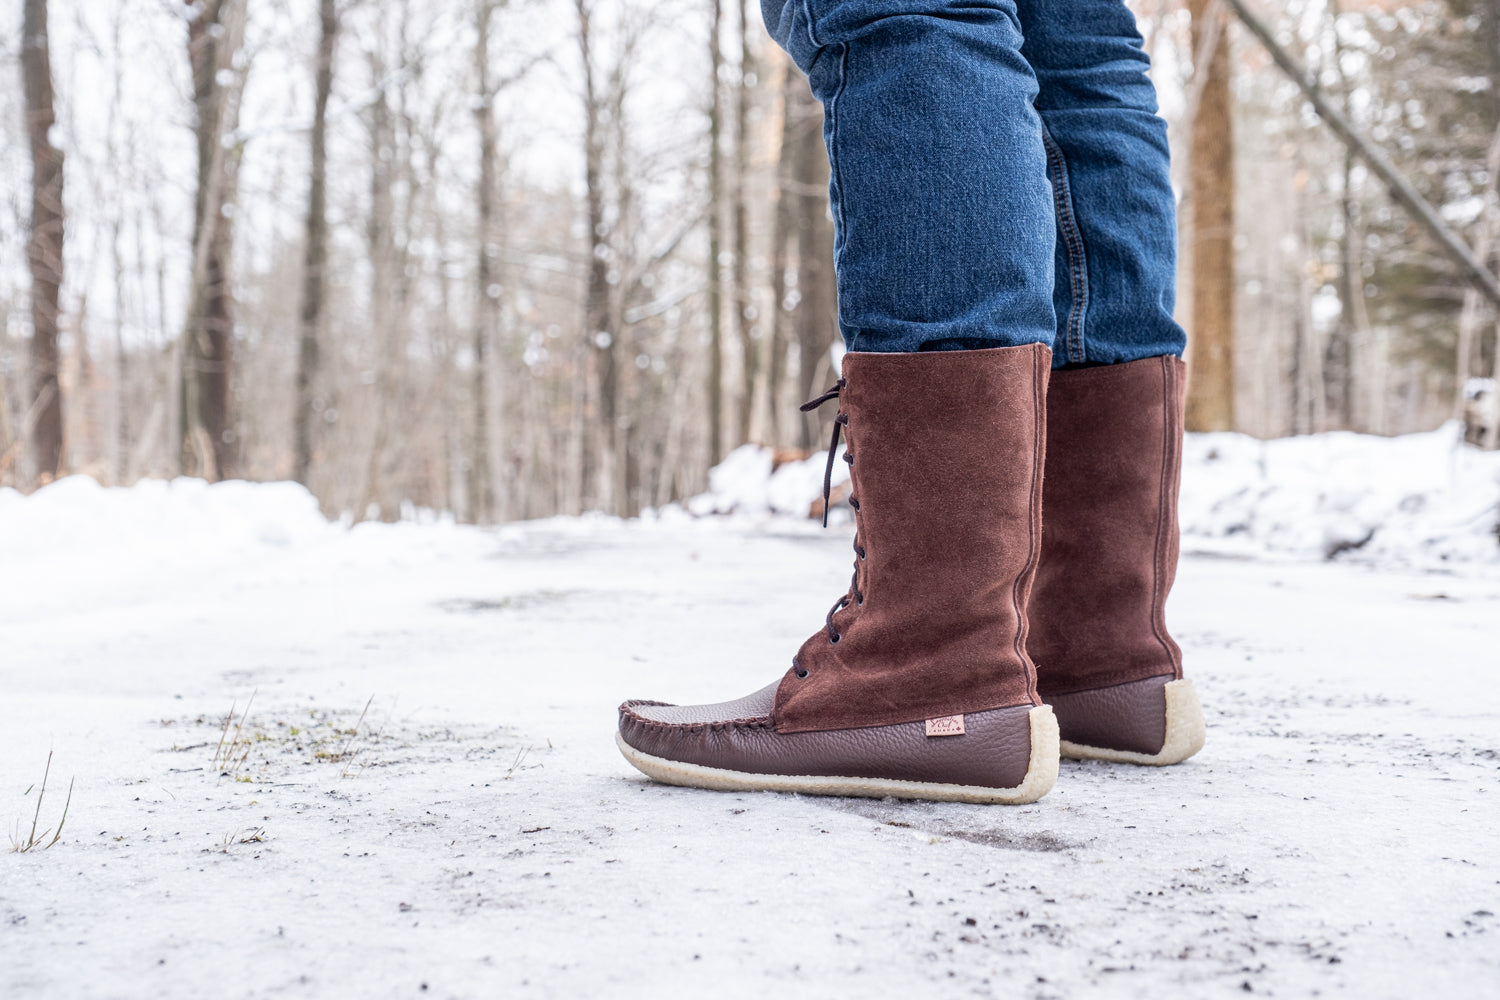 Men's Tall Moccasin Boots Clearance | bellvalefarms.com